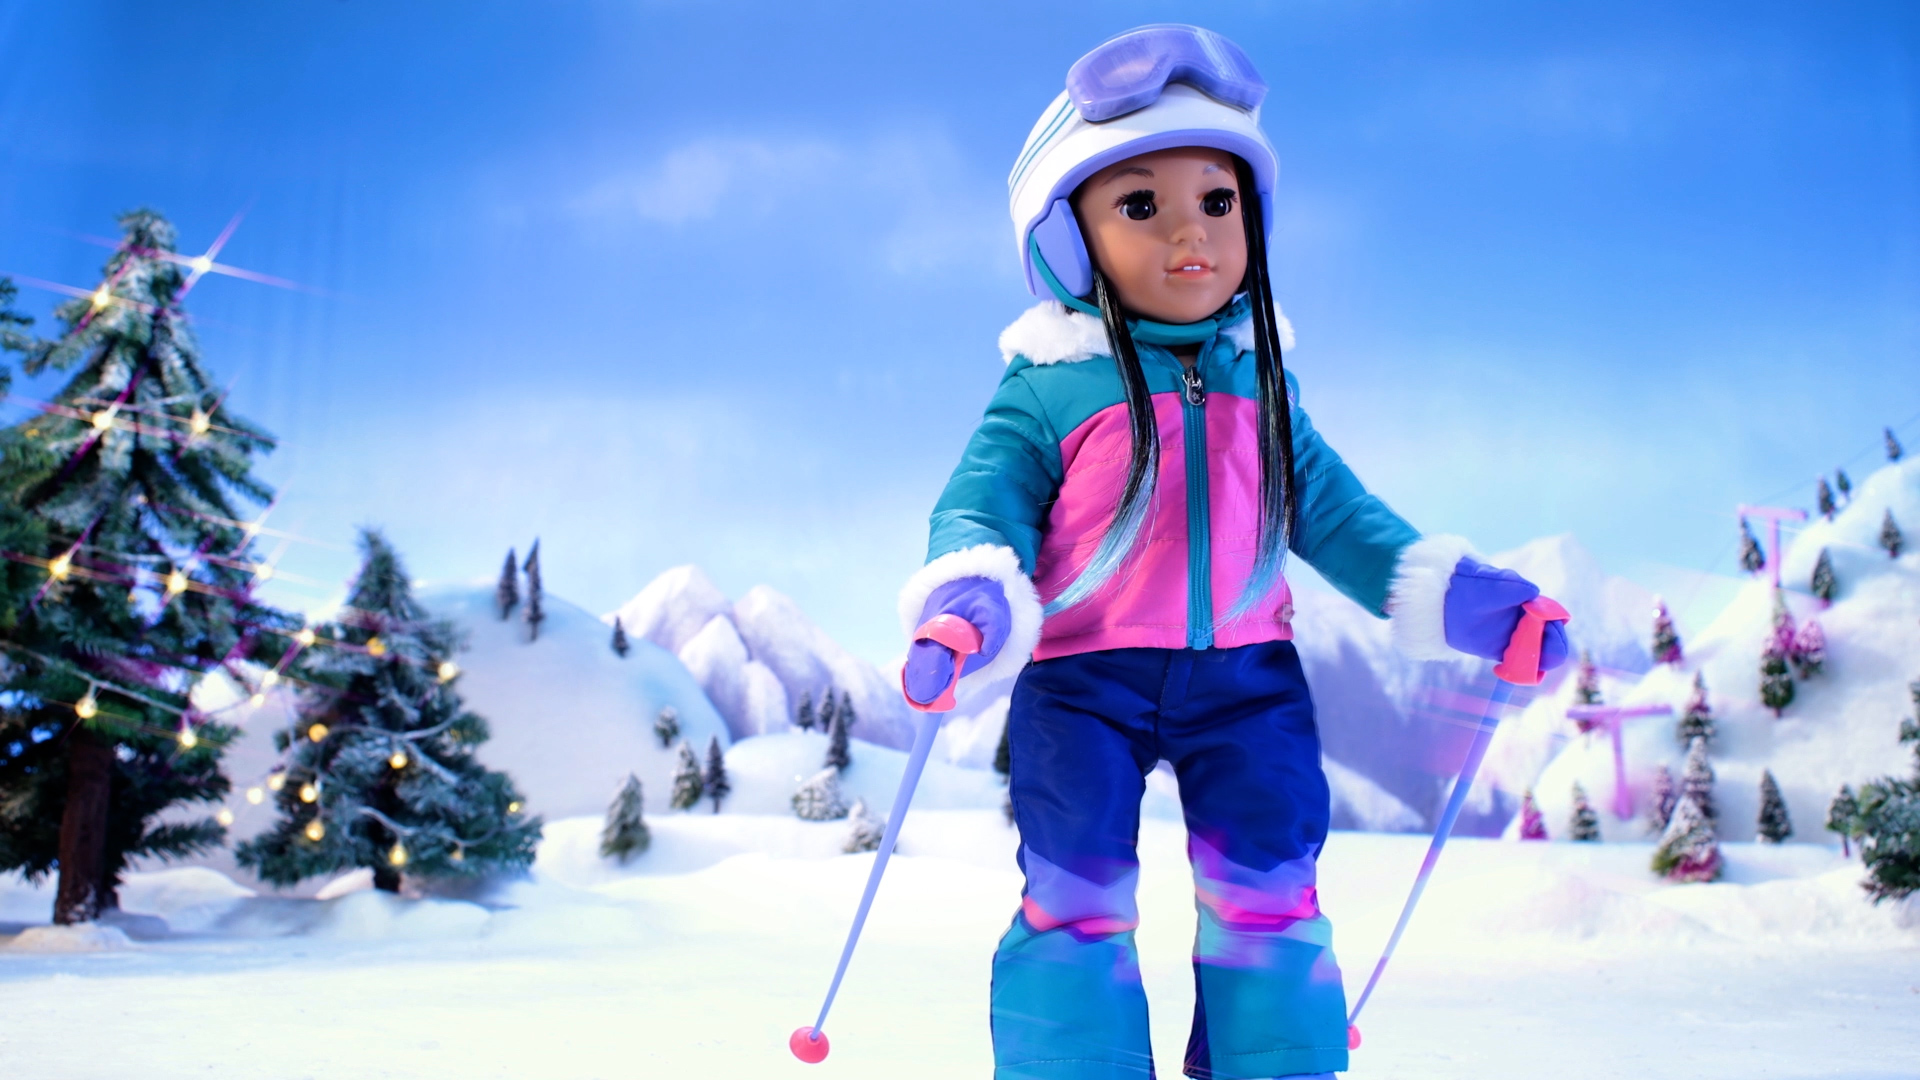 A stop motion animation character in ski gear with snow in the background.